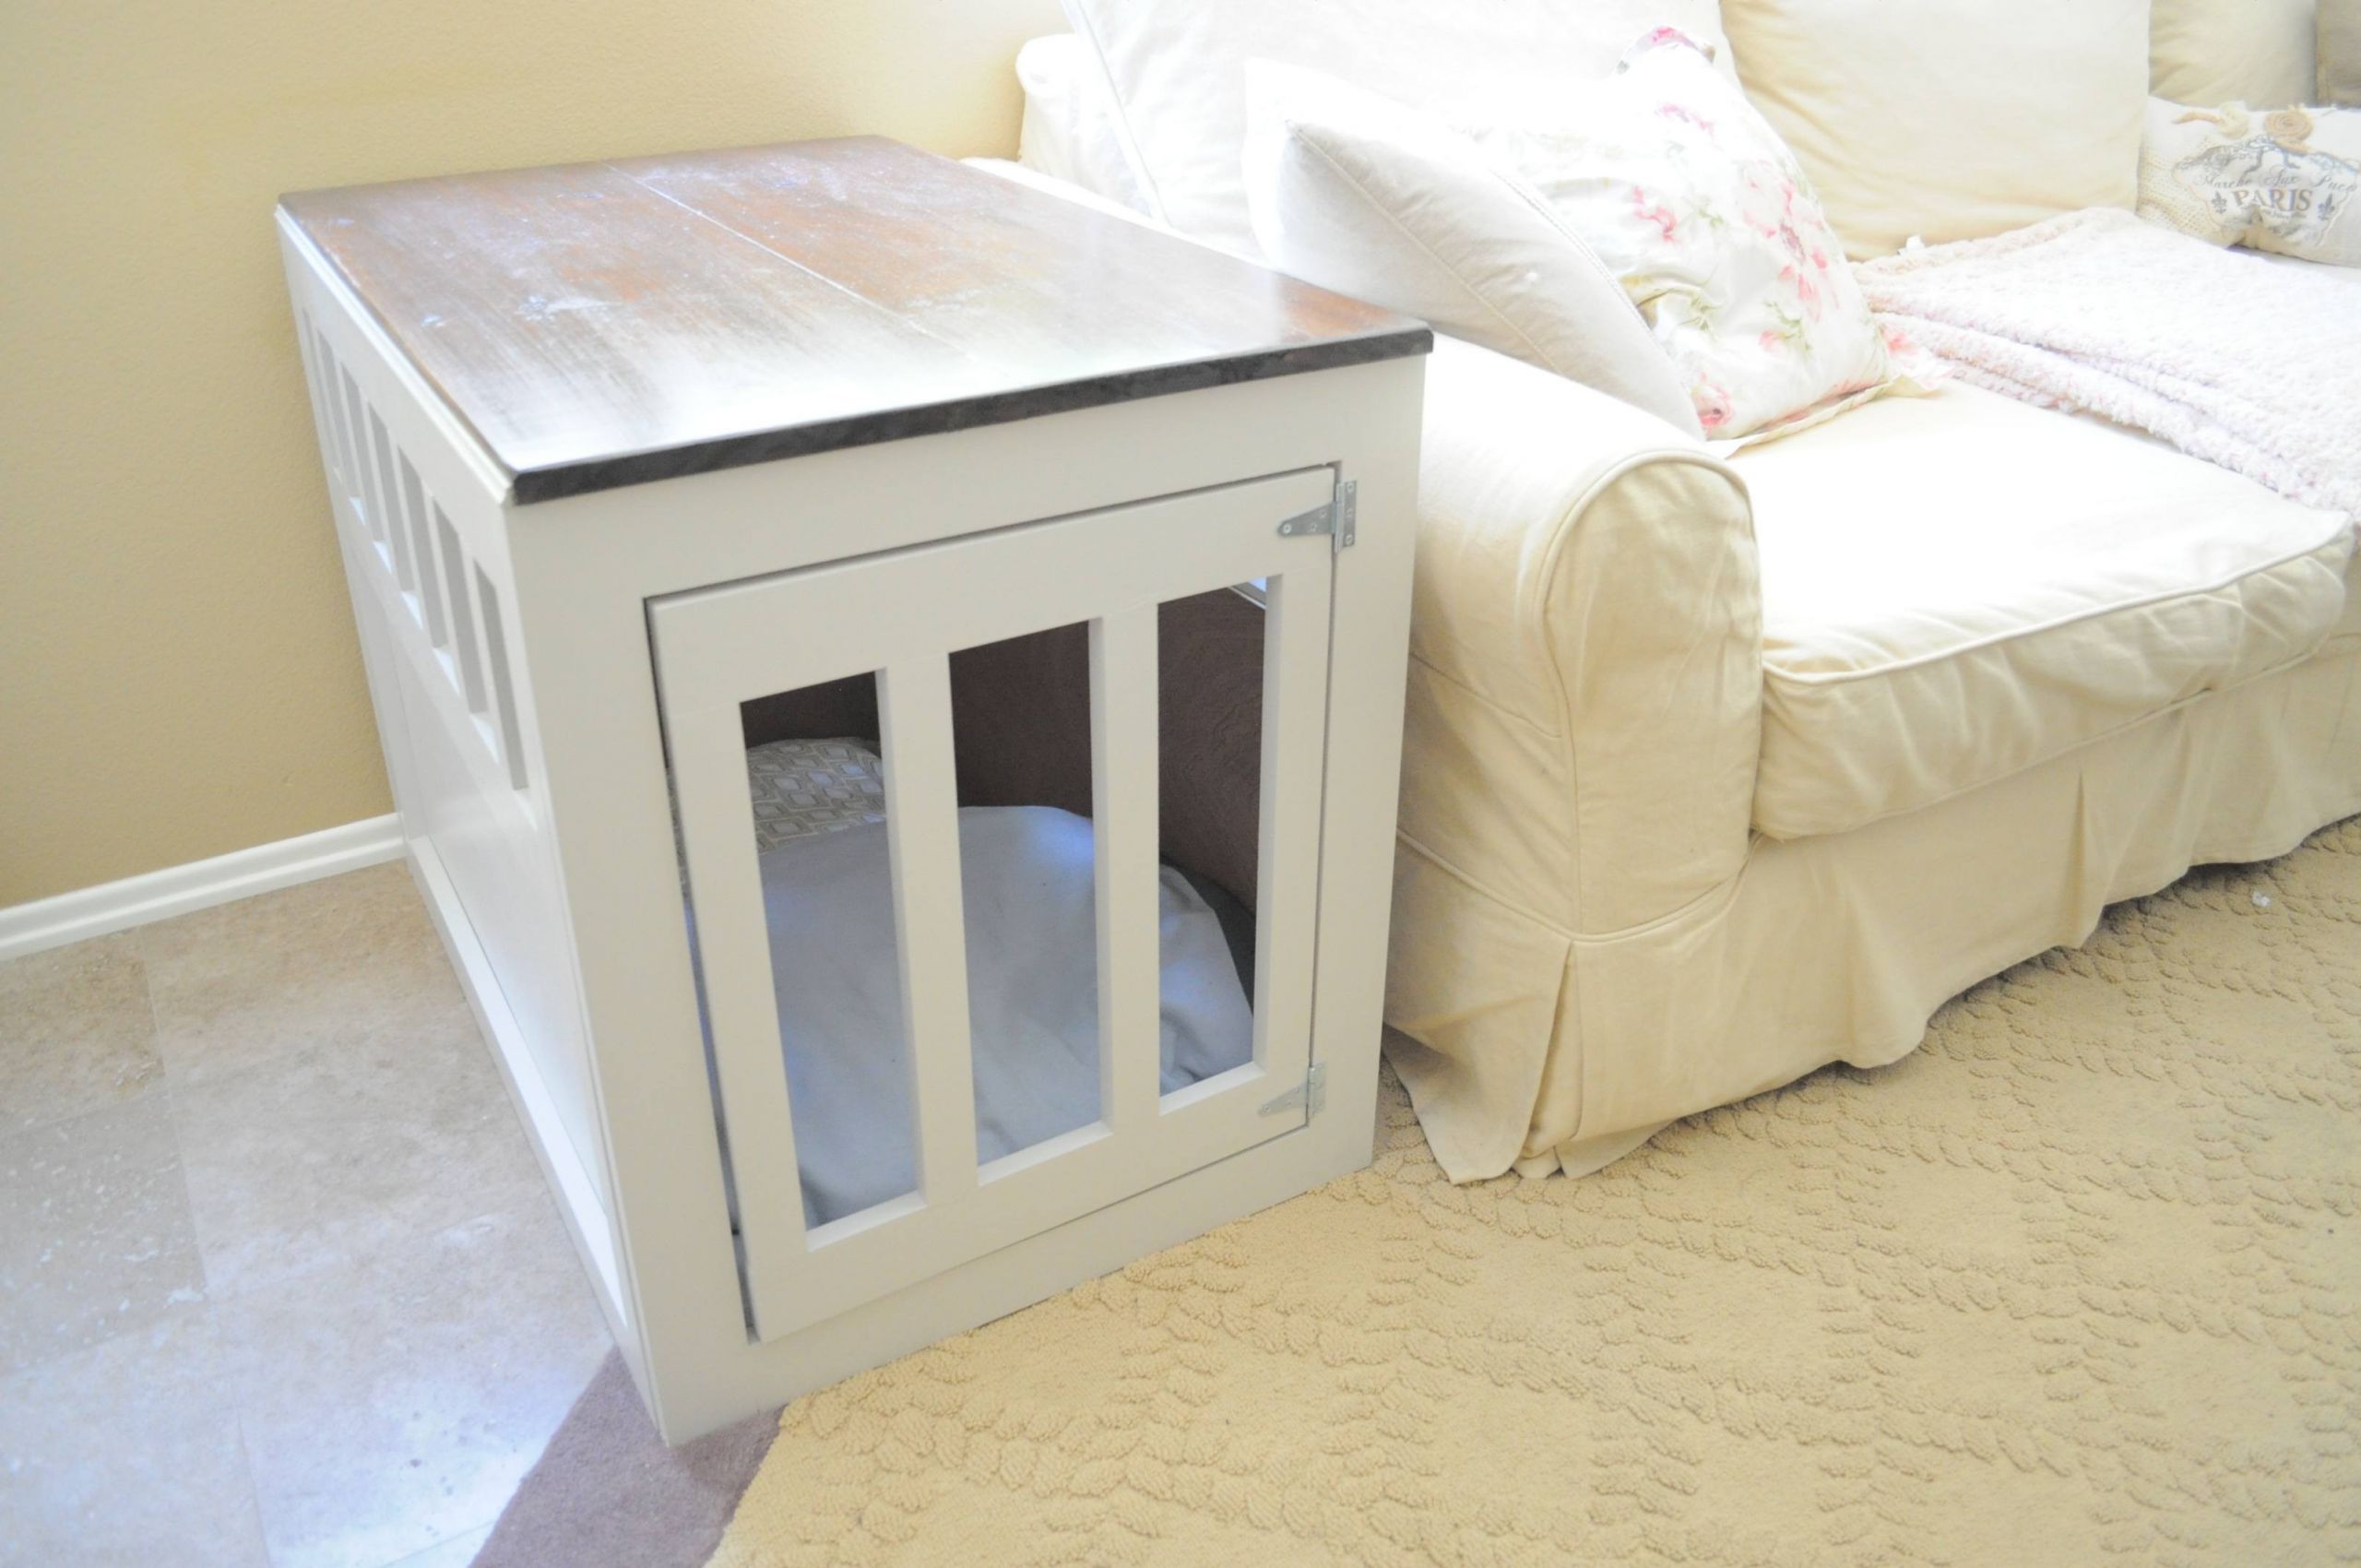 DIY Dog Crate Bed
 Every Dog Owner Should Learn These 20 DIY Pet Projects